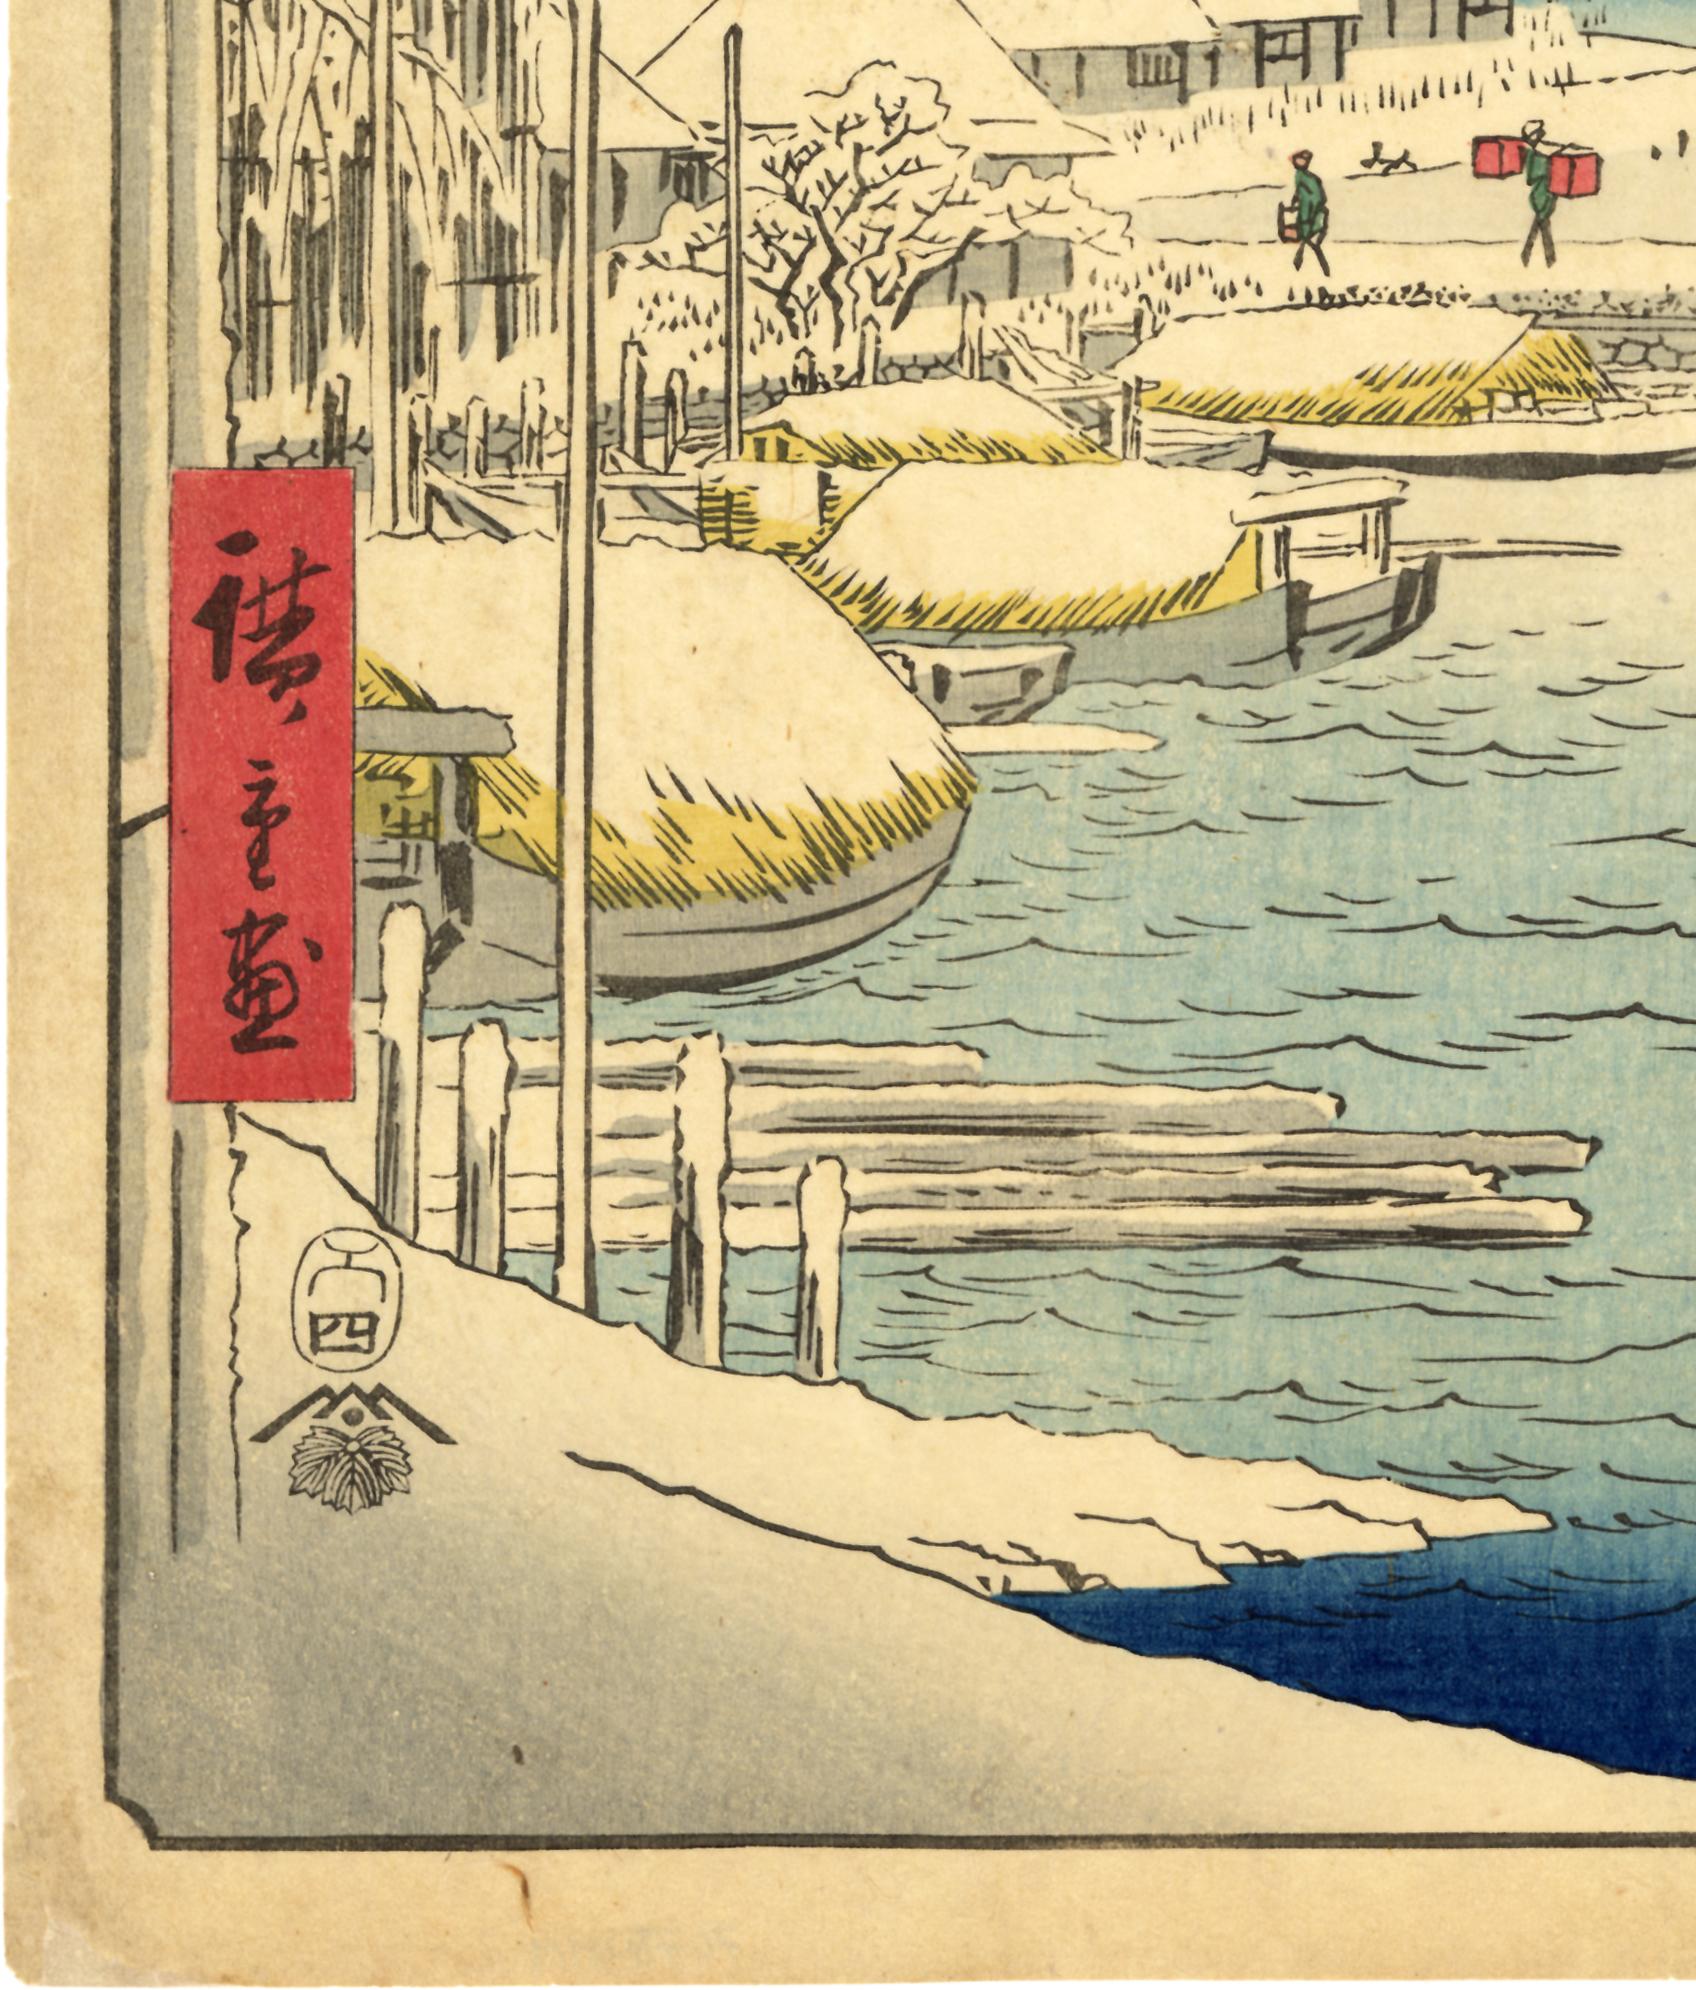 “Sukiyagashi in the Eastern Capital” (Toto sukiyagashi), from the series “Thirty-six Views of Mt Fuji”.  Clean, fresh view of Mount Fuji in a clear sky after snow. The snow blanket gives the scene an almost sleeping feeling, and the figures on the